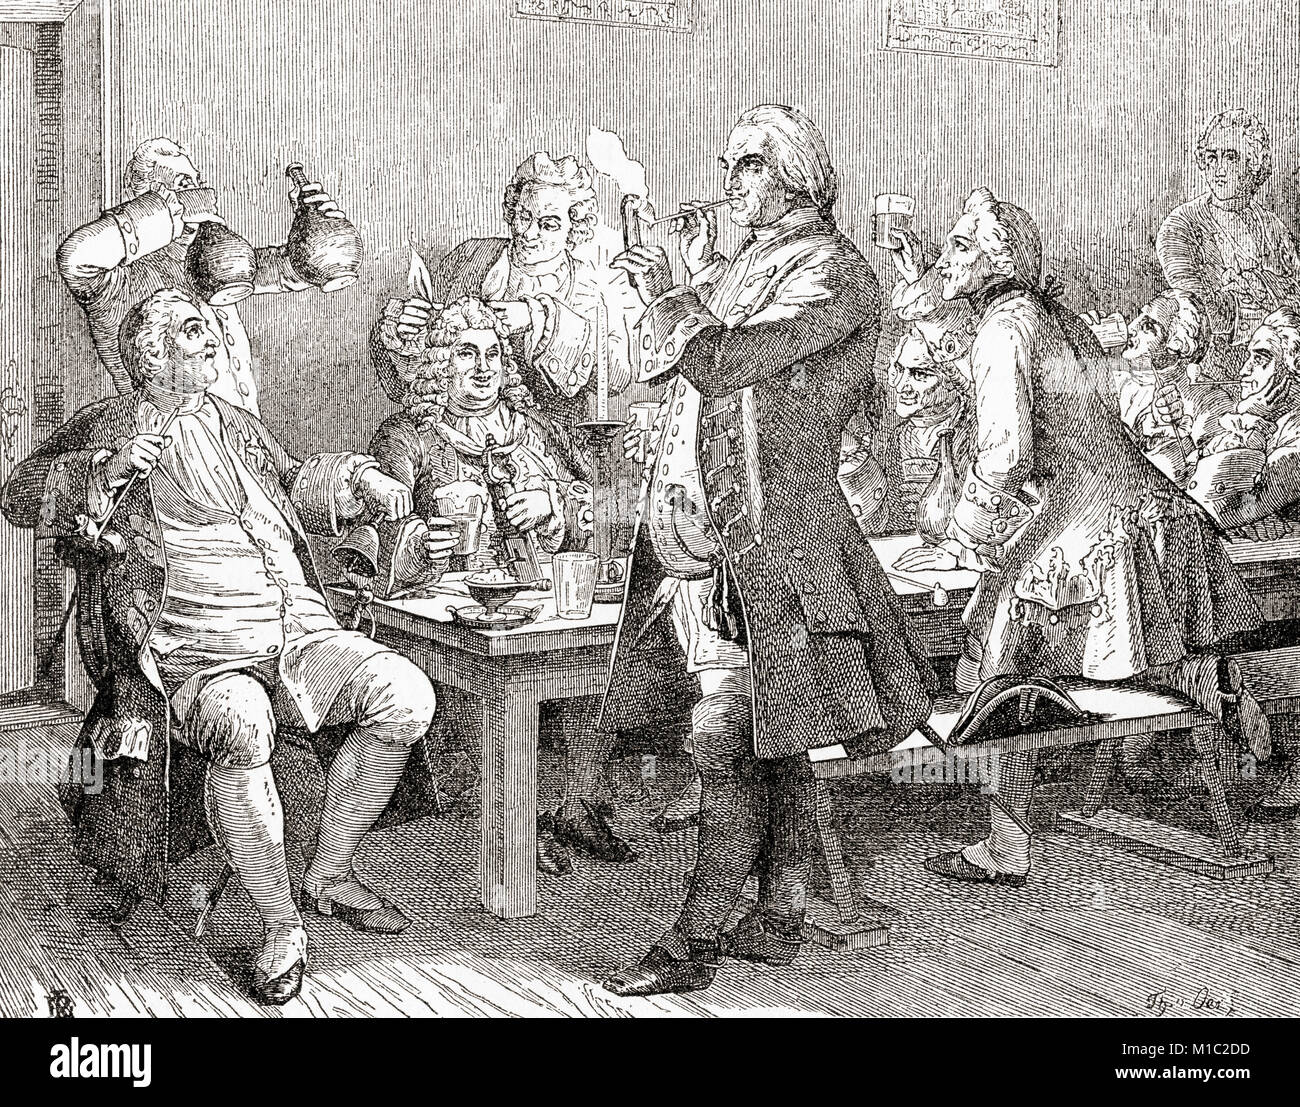 The tobacco club or Tabagie of Frederick William I. A tabagie is a room designated for smoking tobacco and socializing.   Frederick William I of Prussia, 1688 – 1740, aka Soldier King.  King in Prussia and Elector of Brandenburg.  From Ward and Lock's Illustrated History of the World, published c.1882. Stock Photo